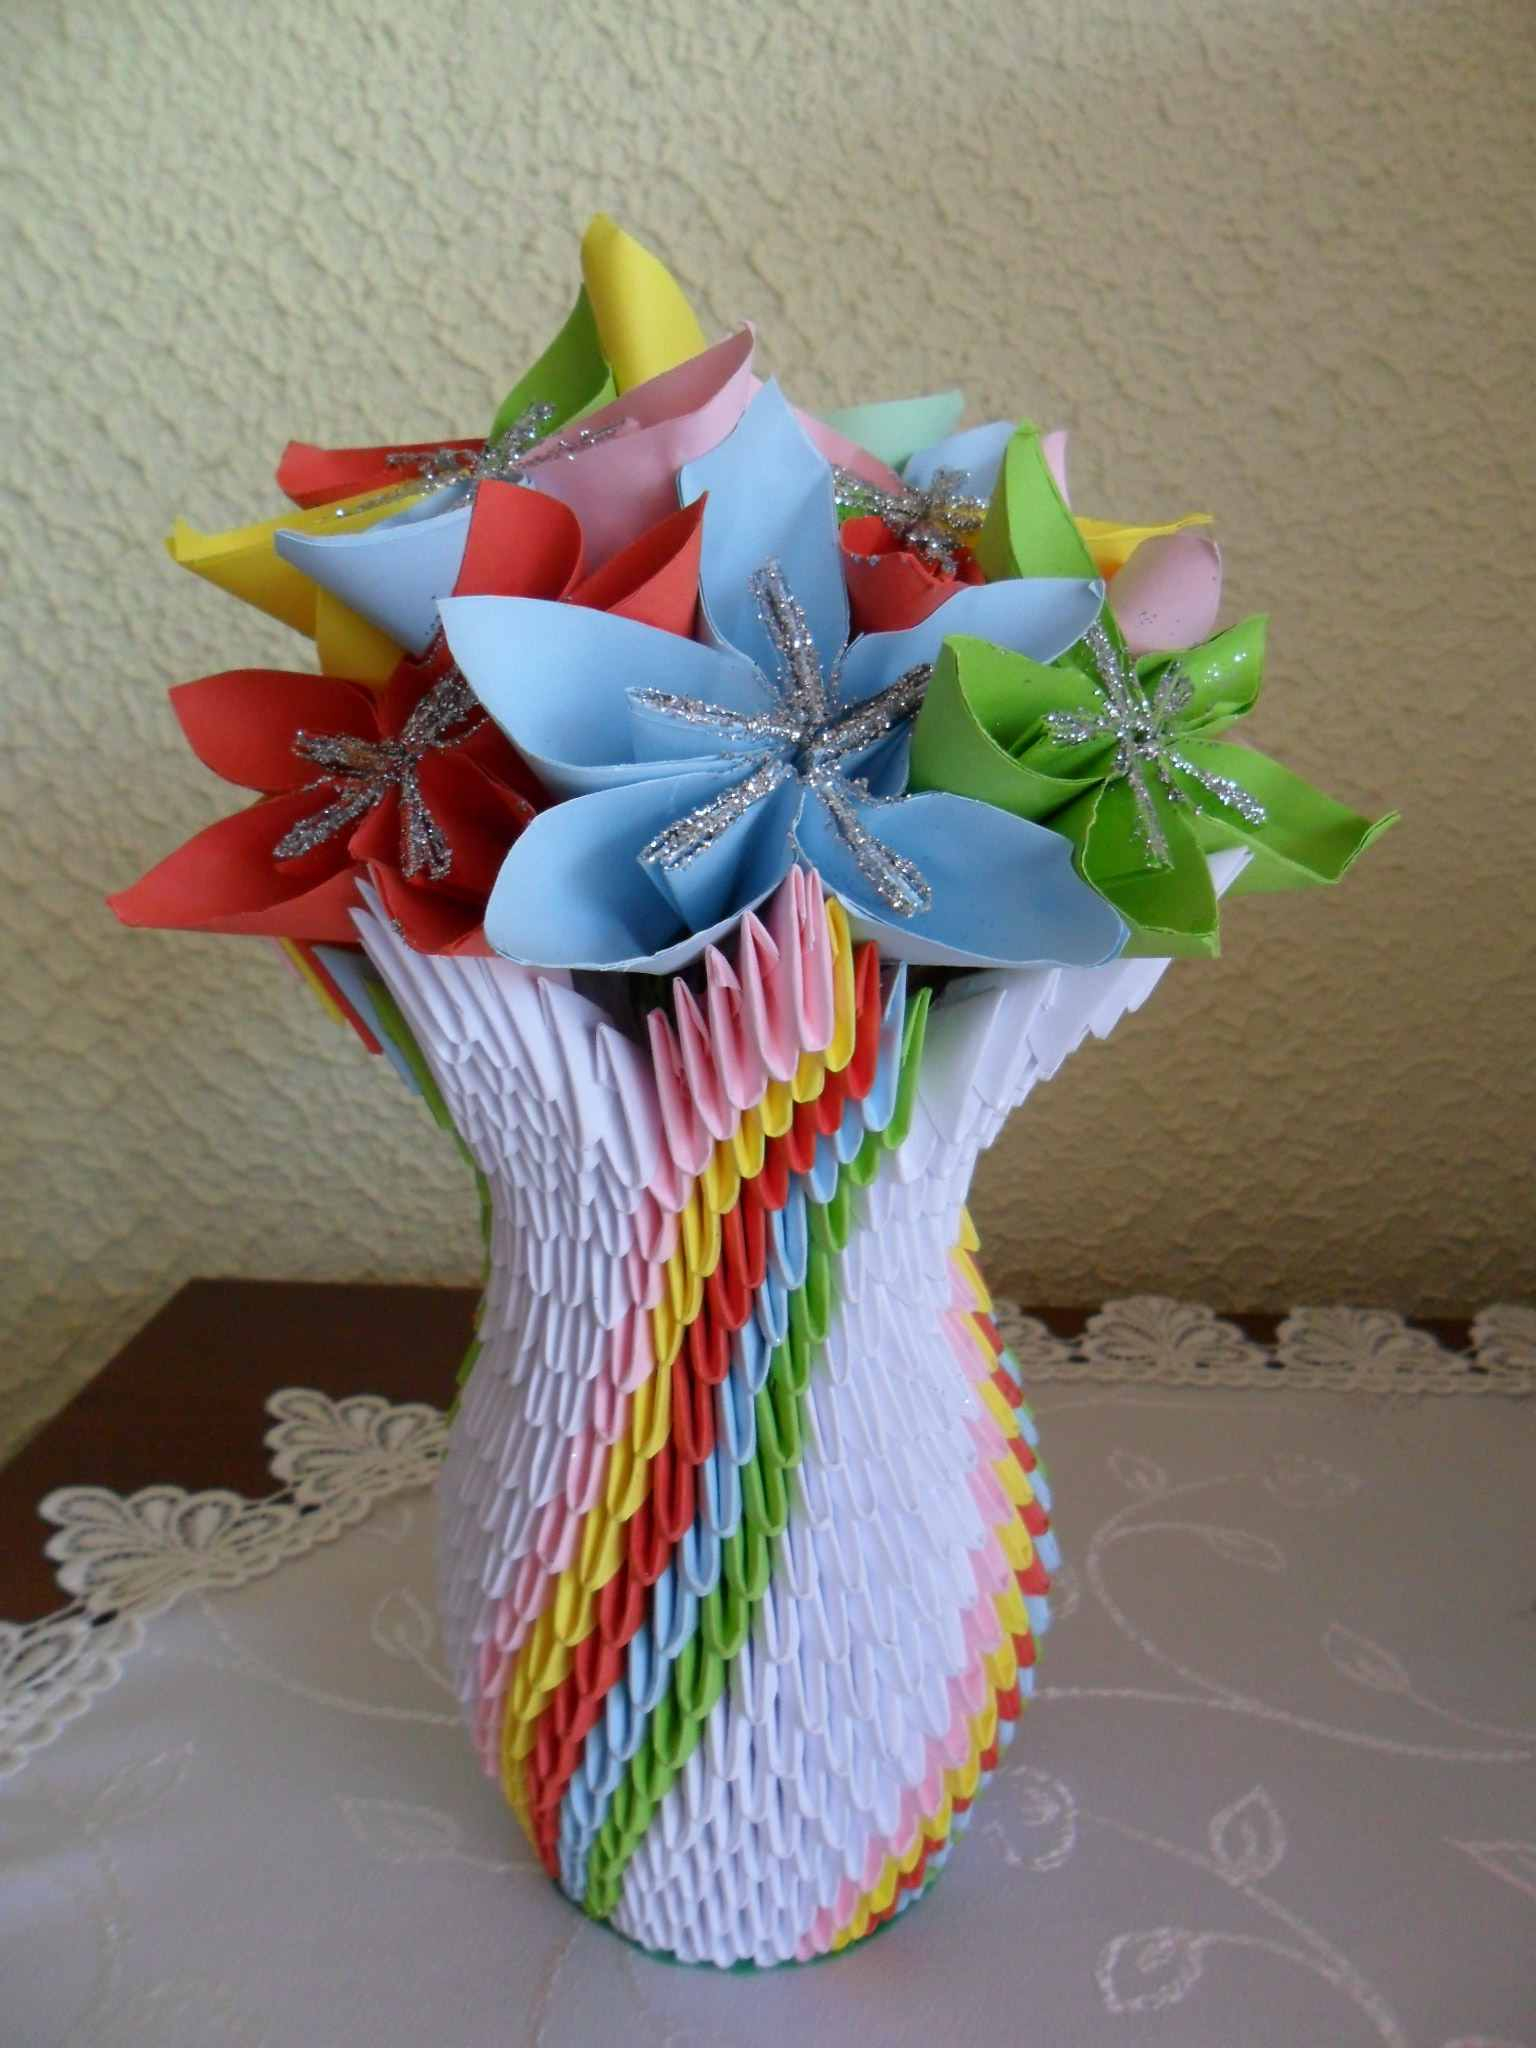 How To Make A 3D Origami Vase An Introduction To Golden Venture Folding